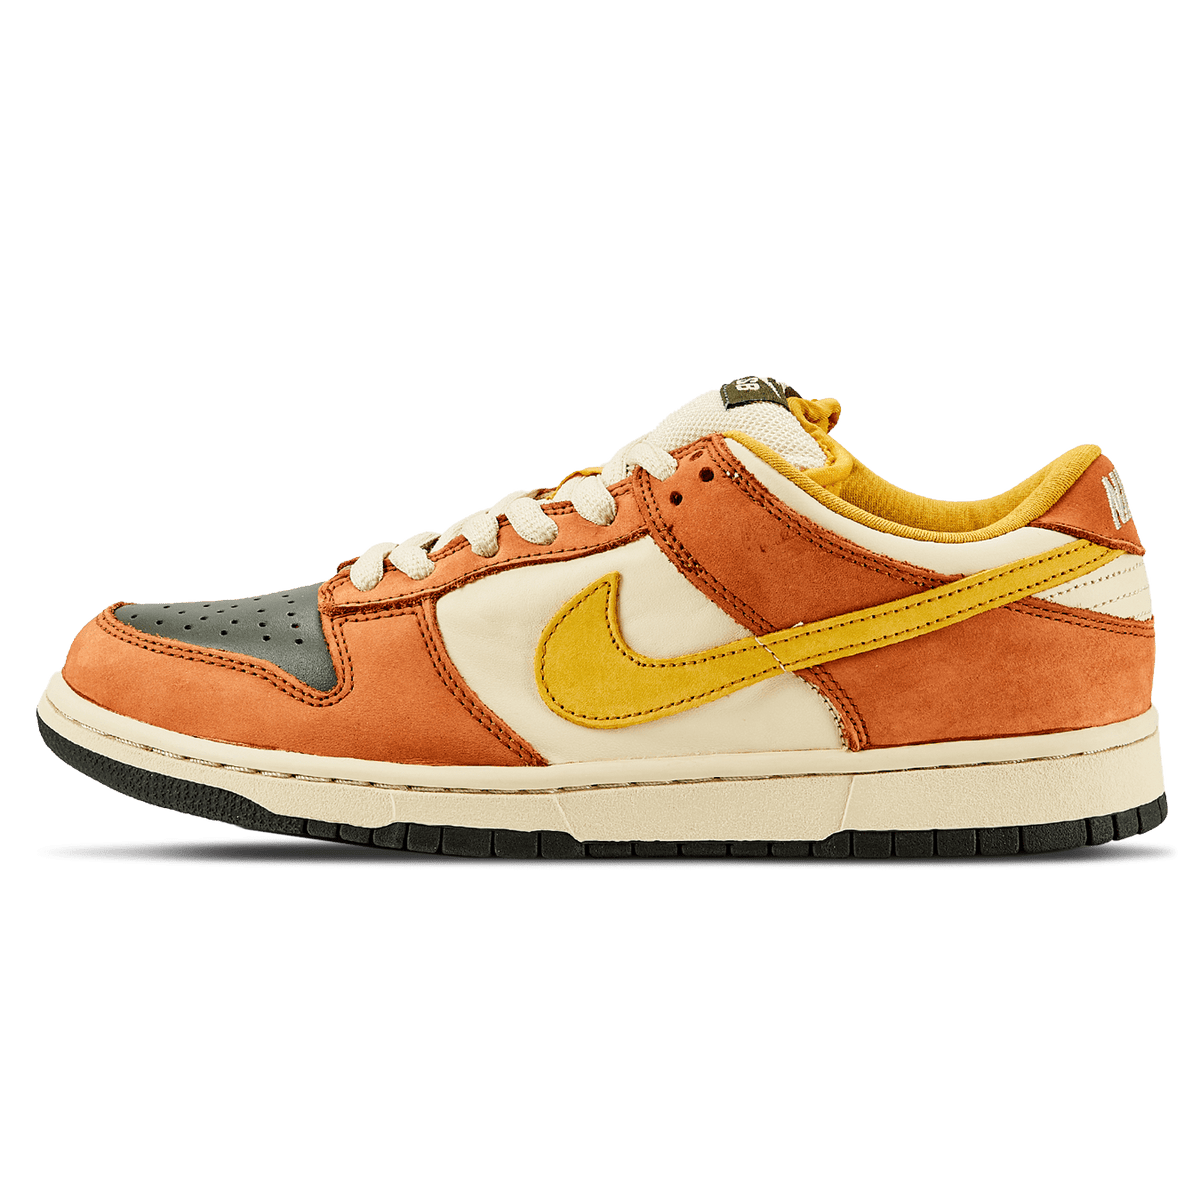 nike dunk sb low vapour mineral yellow 304292 271 1